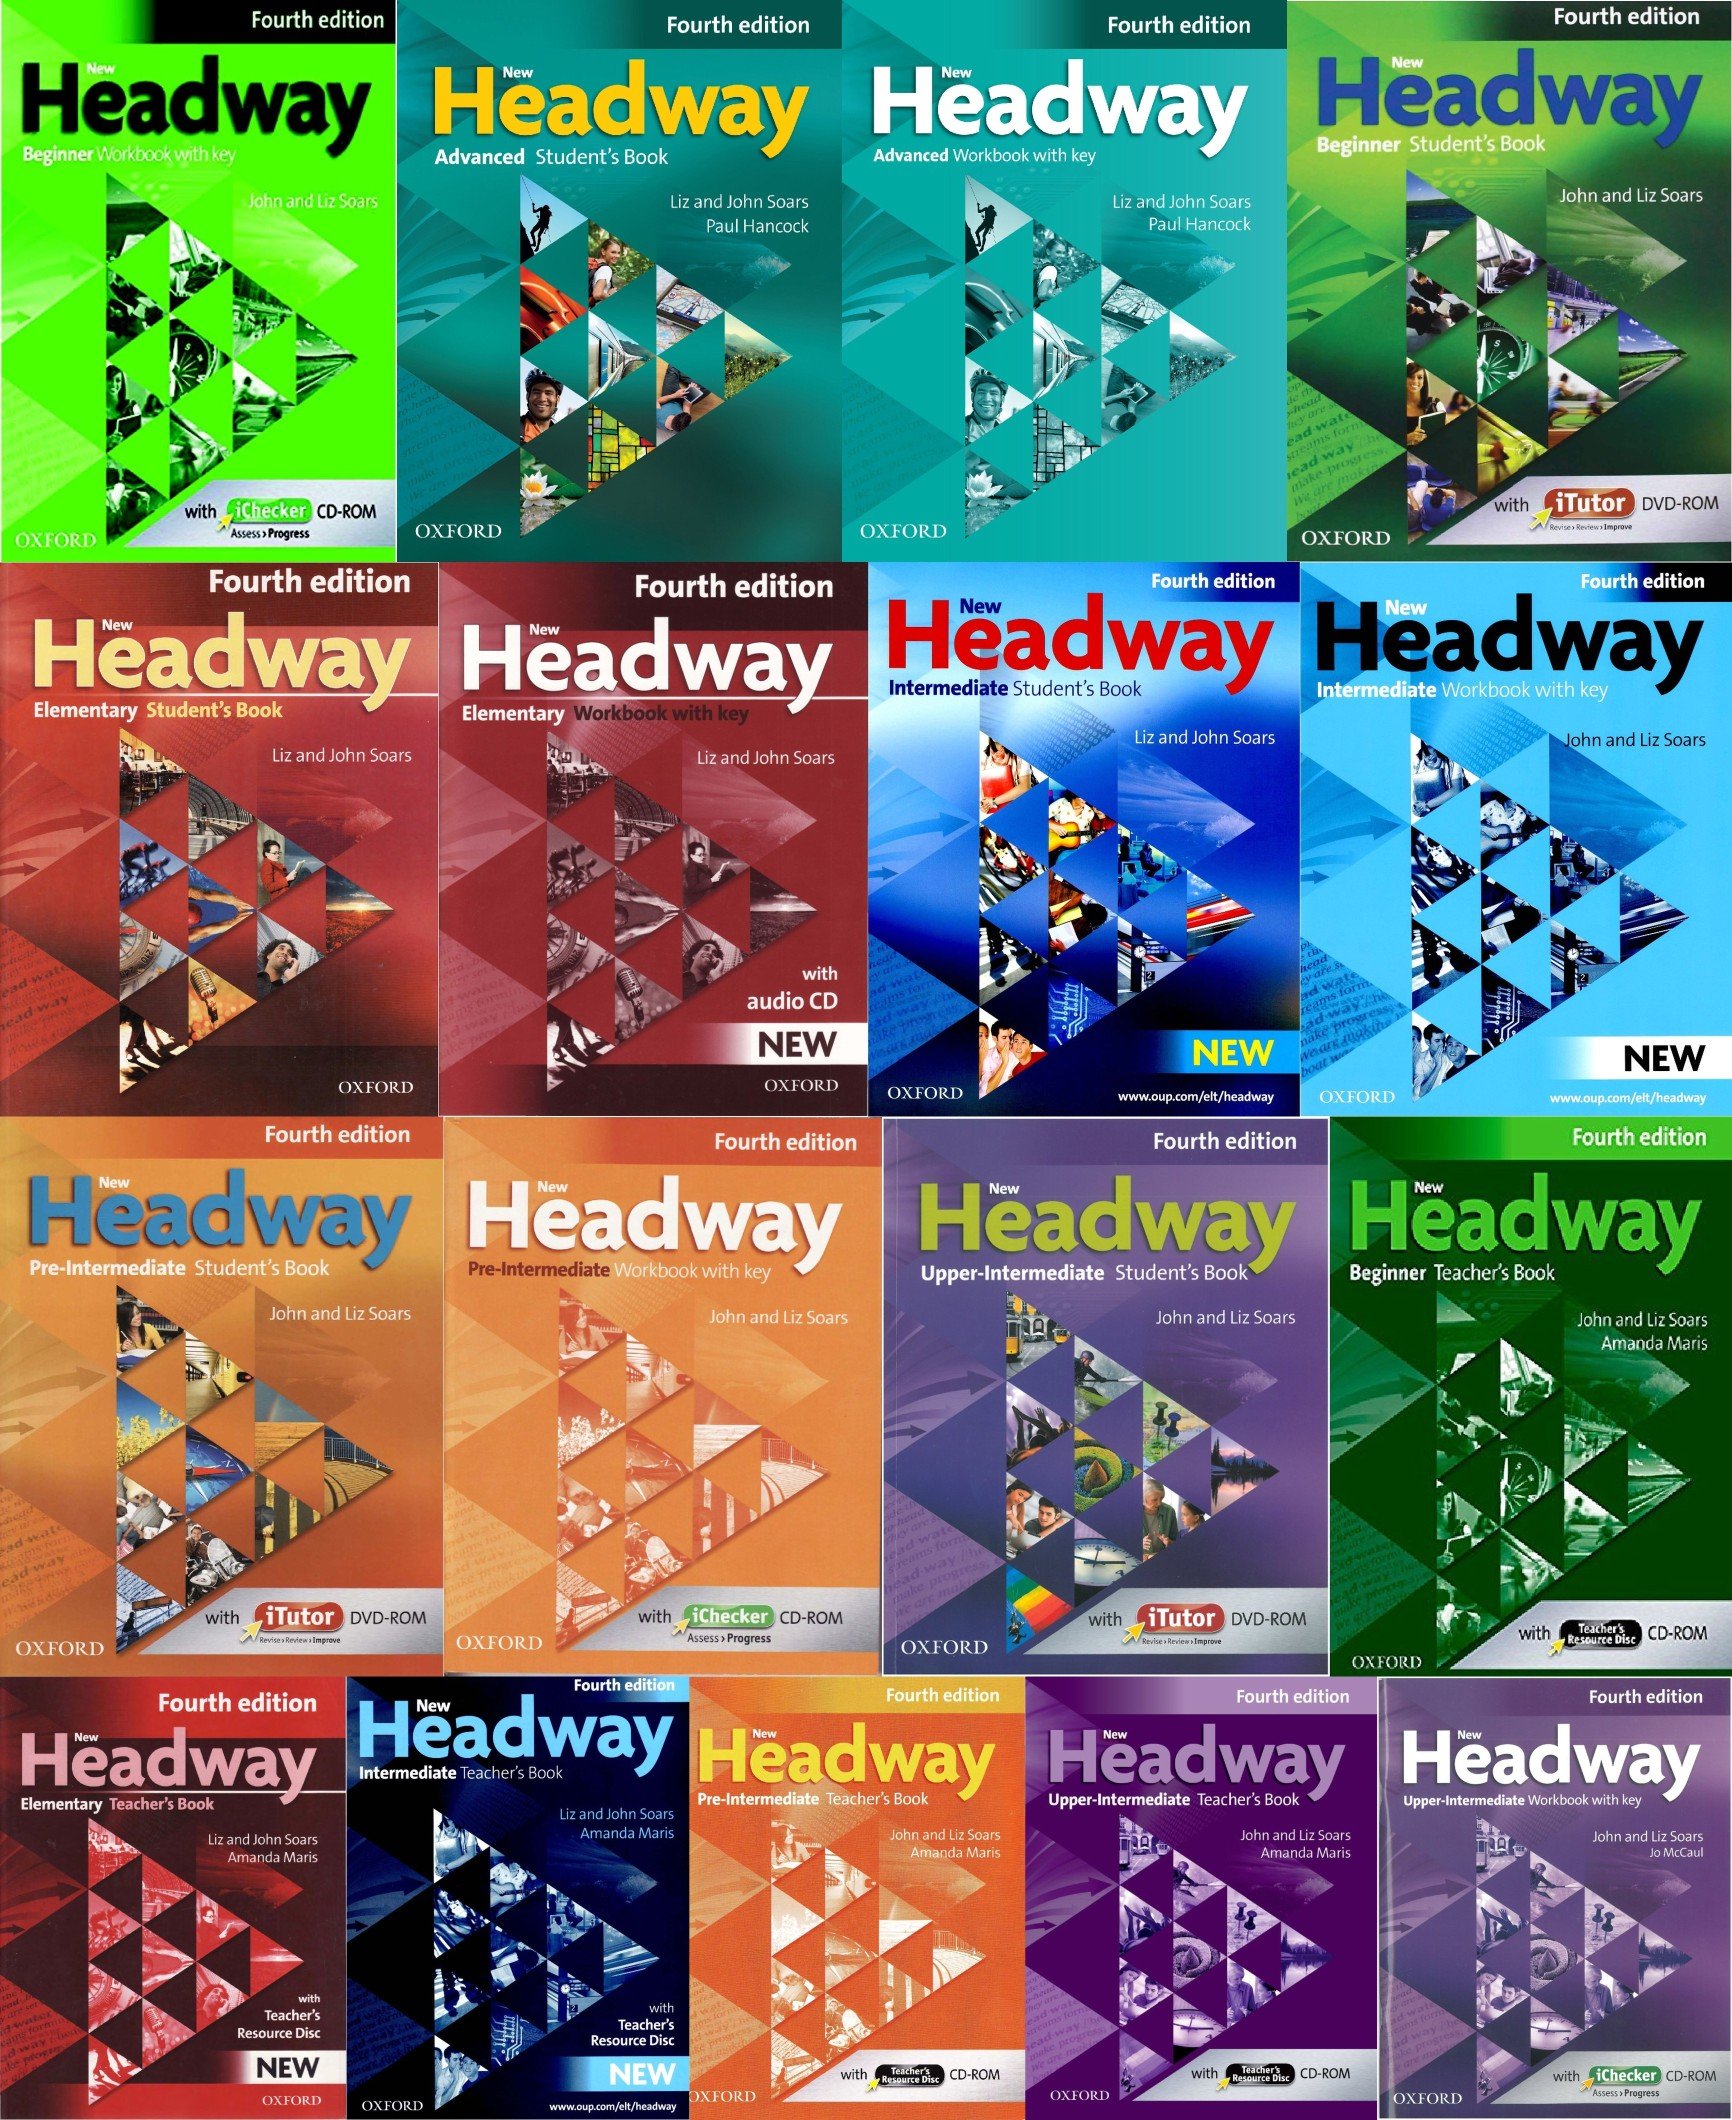 Headway elementary 4th. New Headway 4th Edition. New Headway уровни. Headway Elementary 5th Edition. New Headway Elementary 4th Edition.